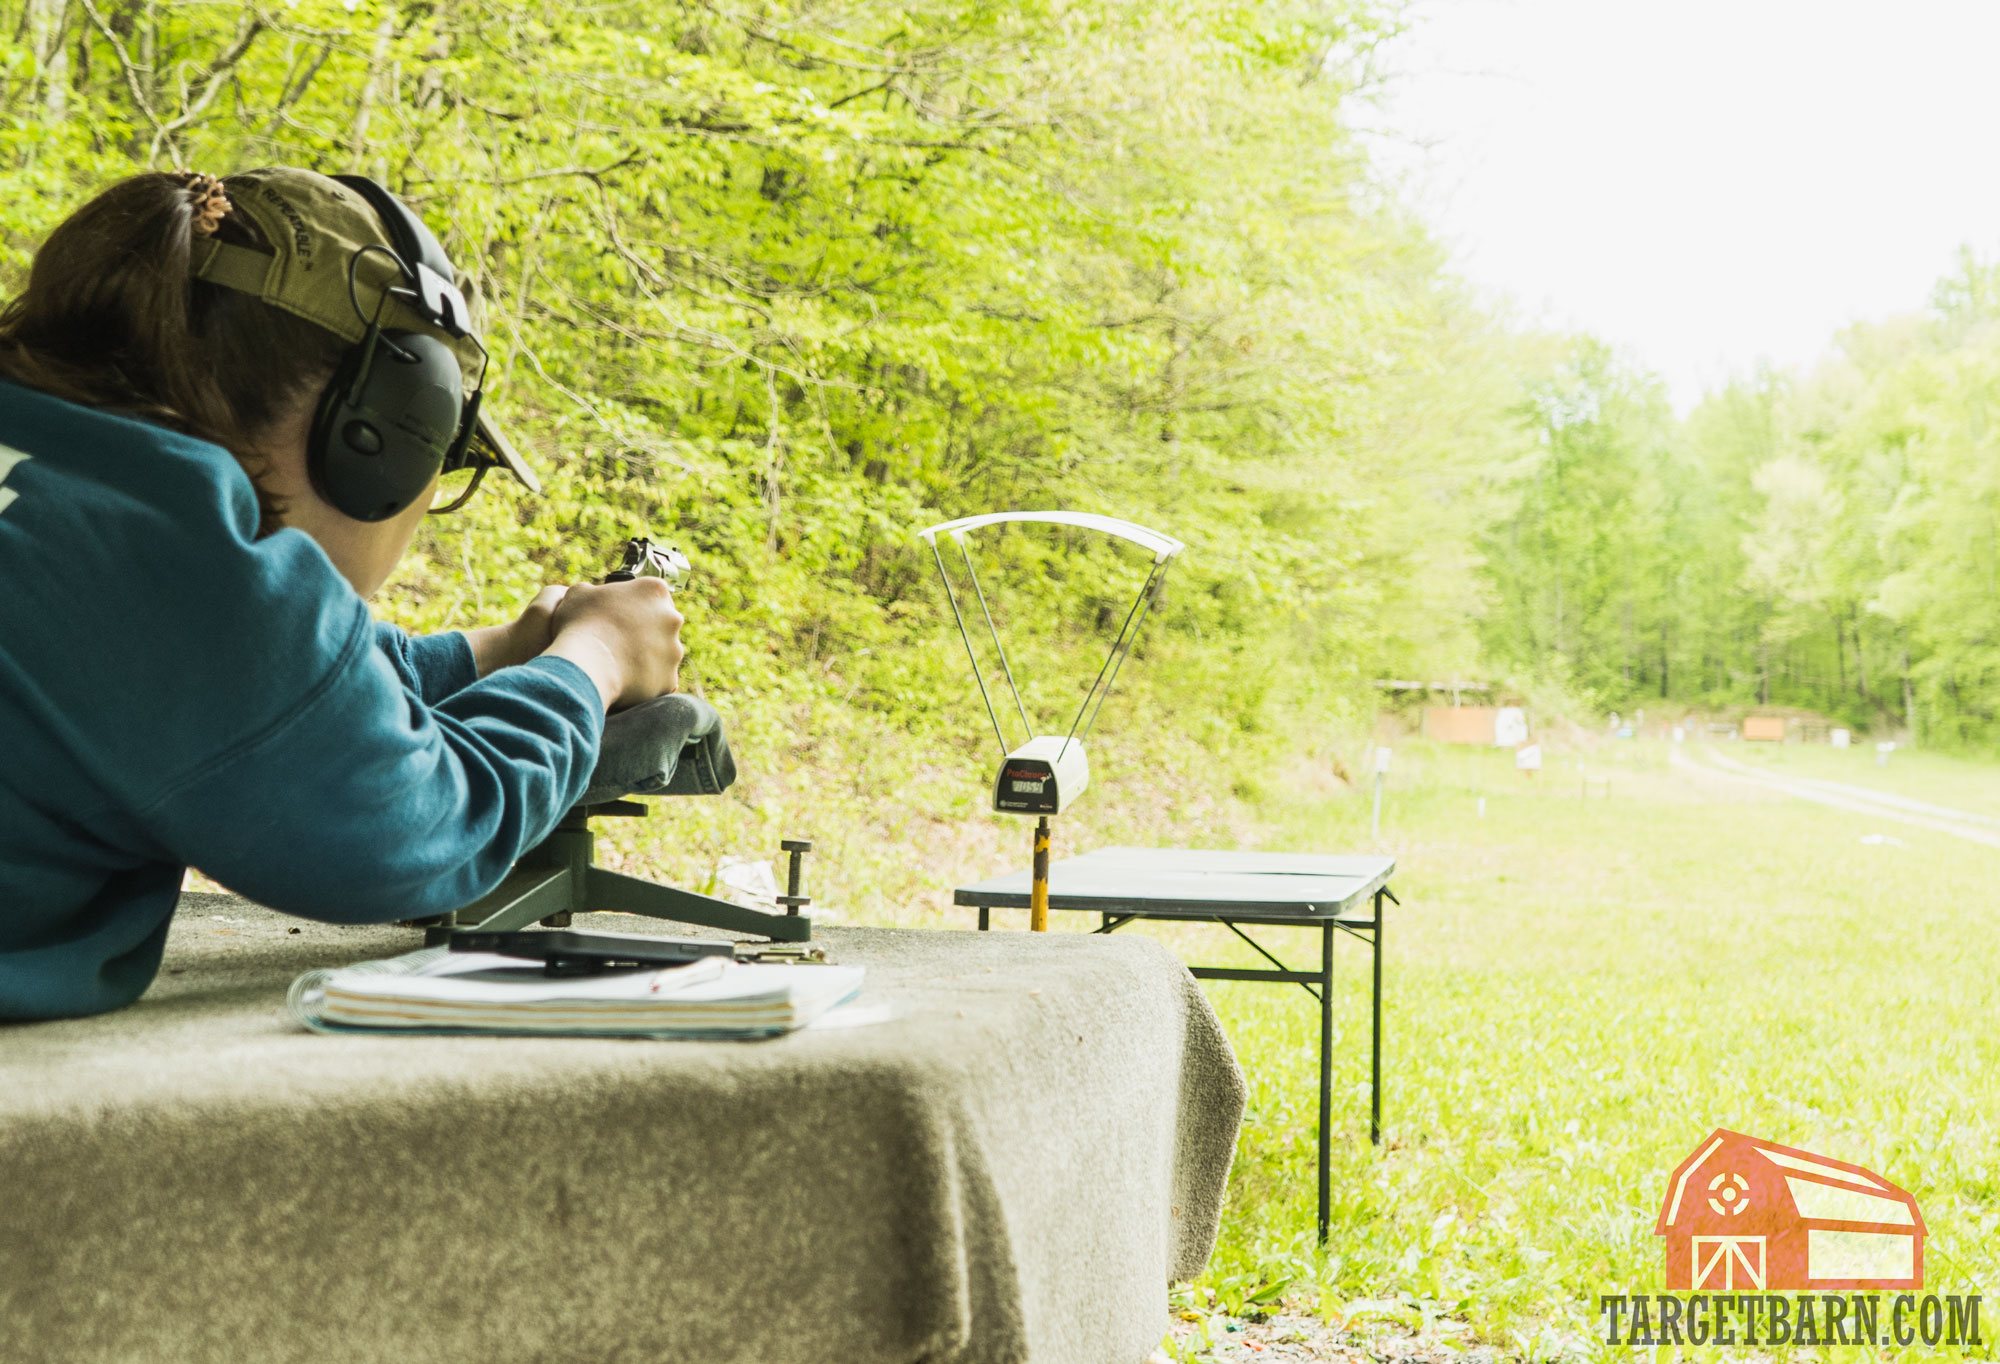 the author shooting rounds through a chronograph on a bench at the range